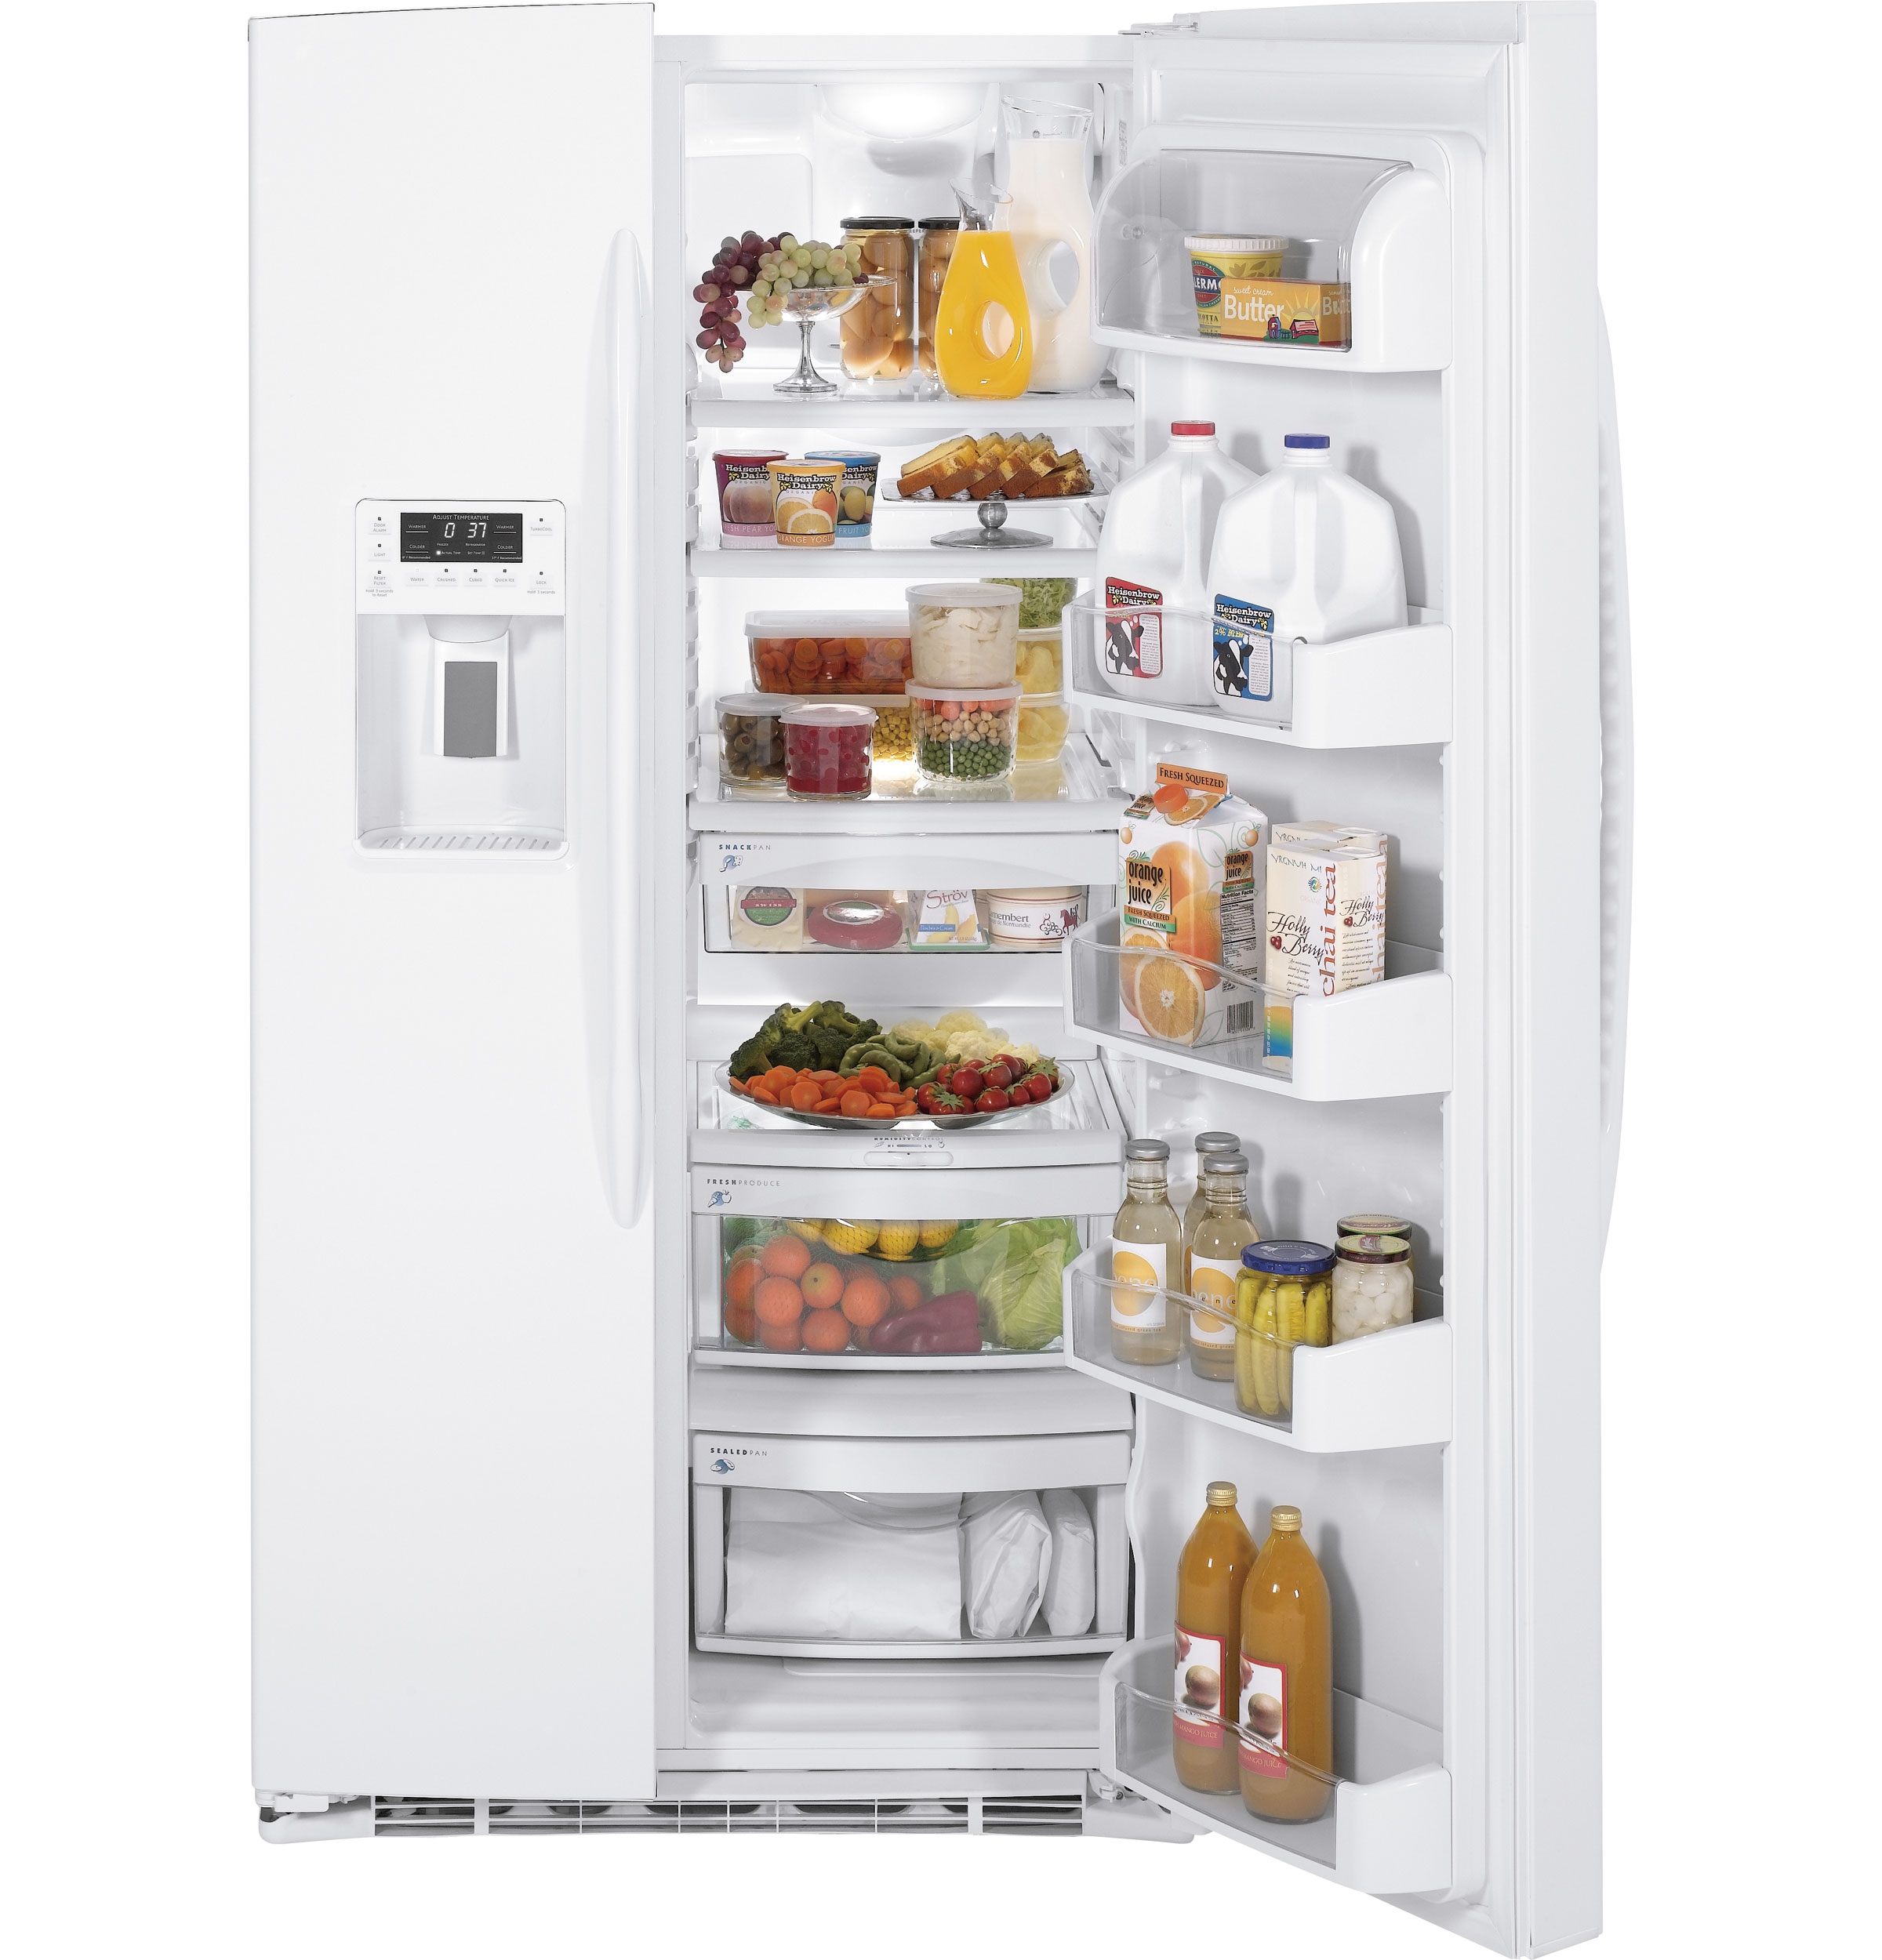 GE Profile™ ENERGY STAR® 25.9 Cu. Ft. Side-by-Side Refrigerator with Dispenser